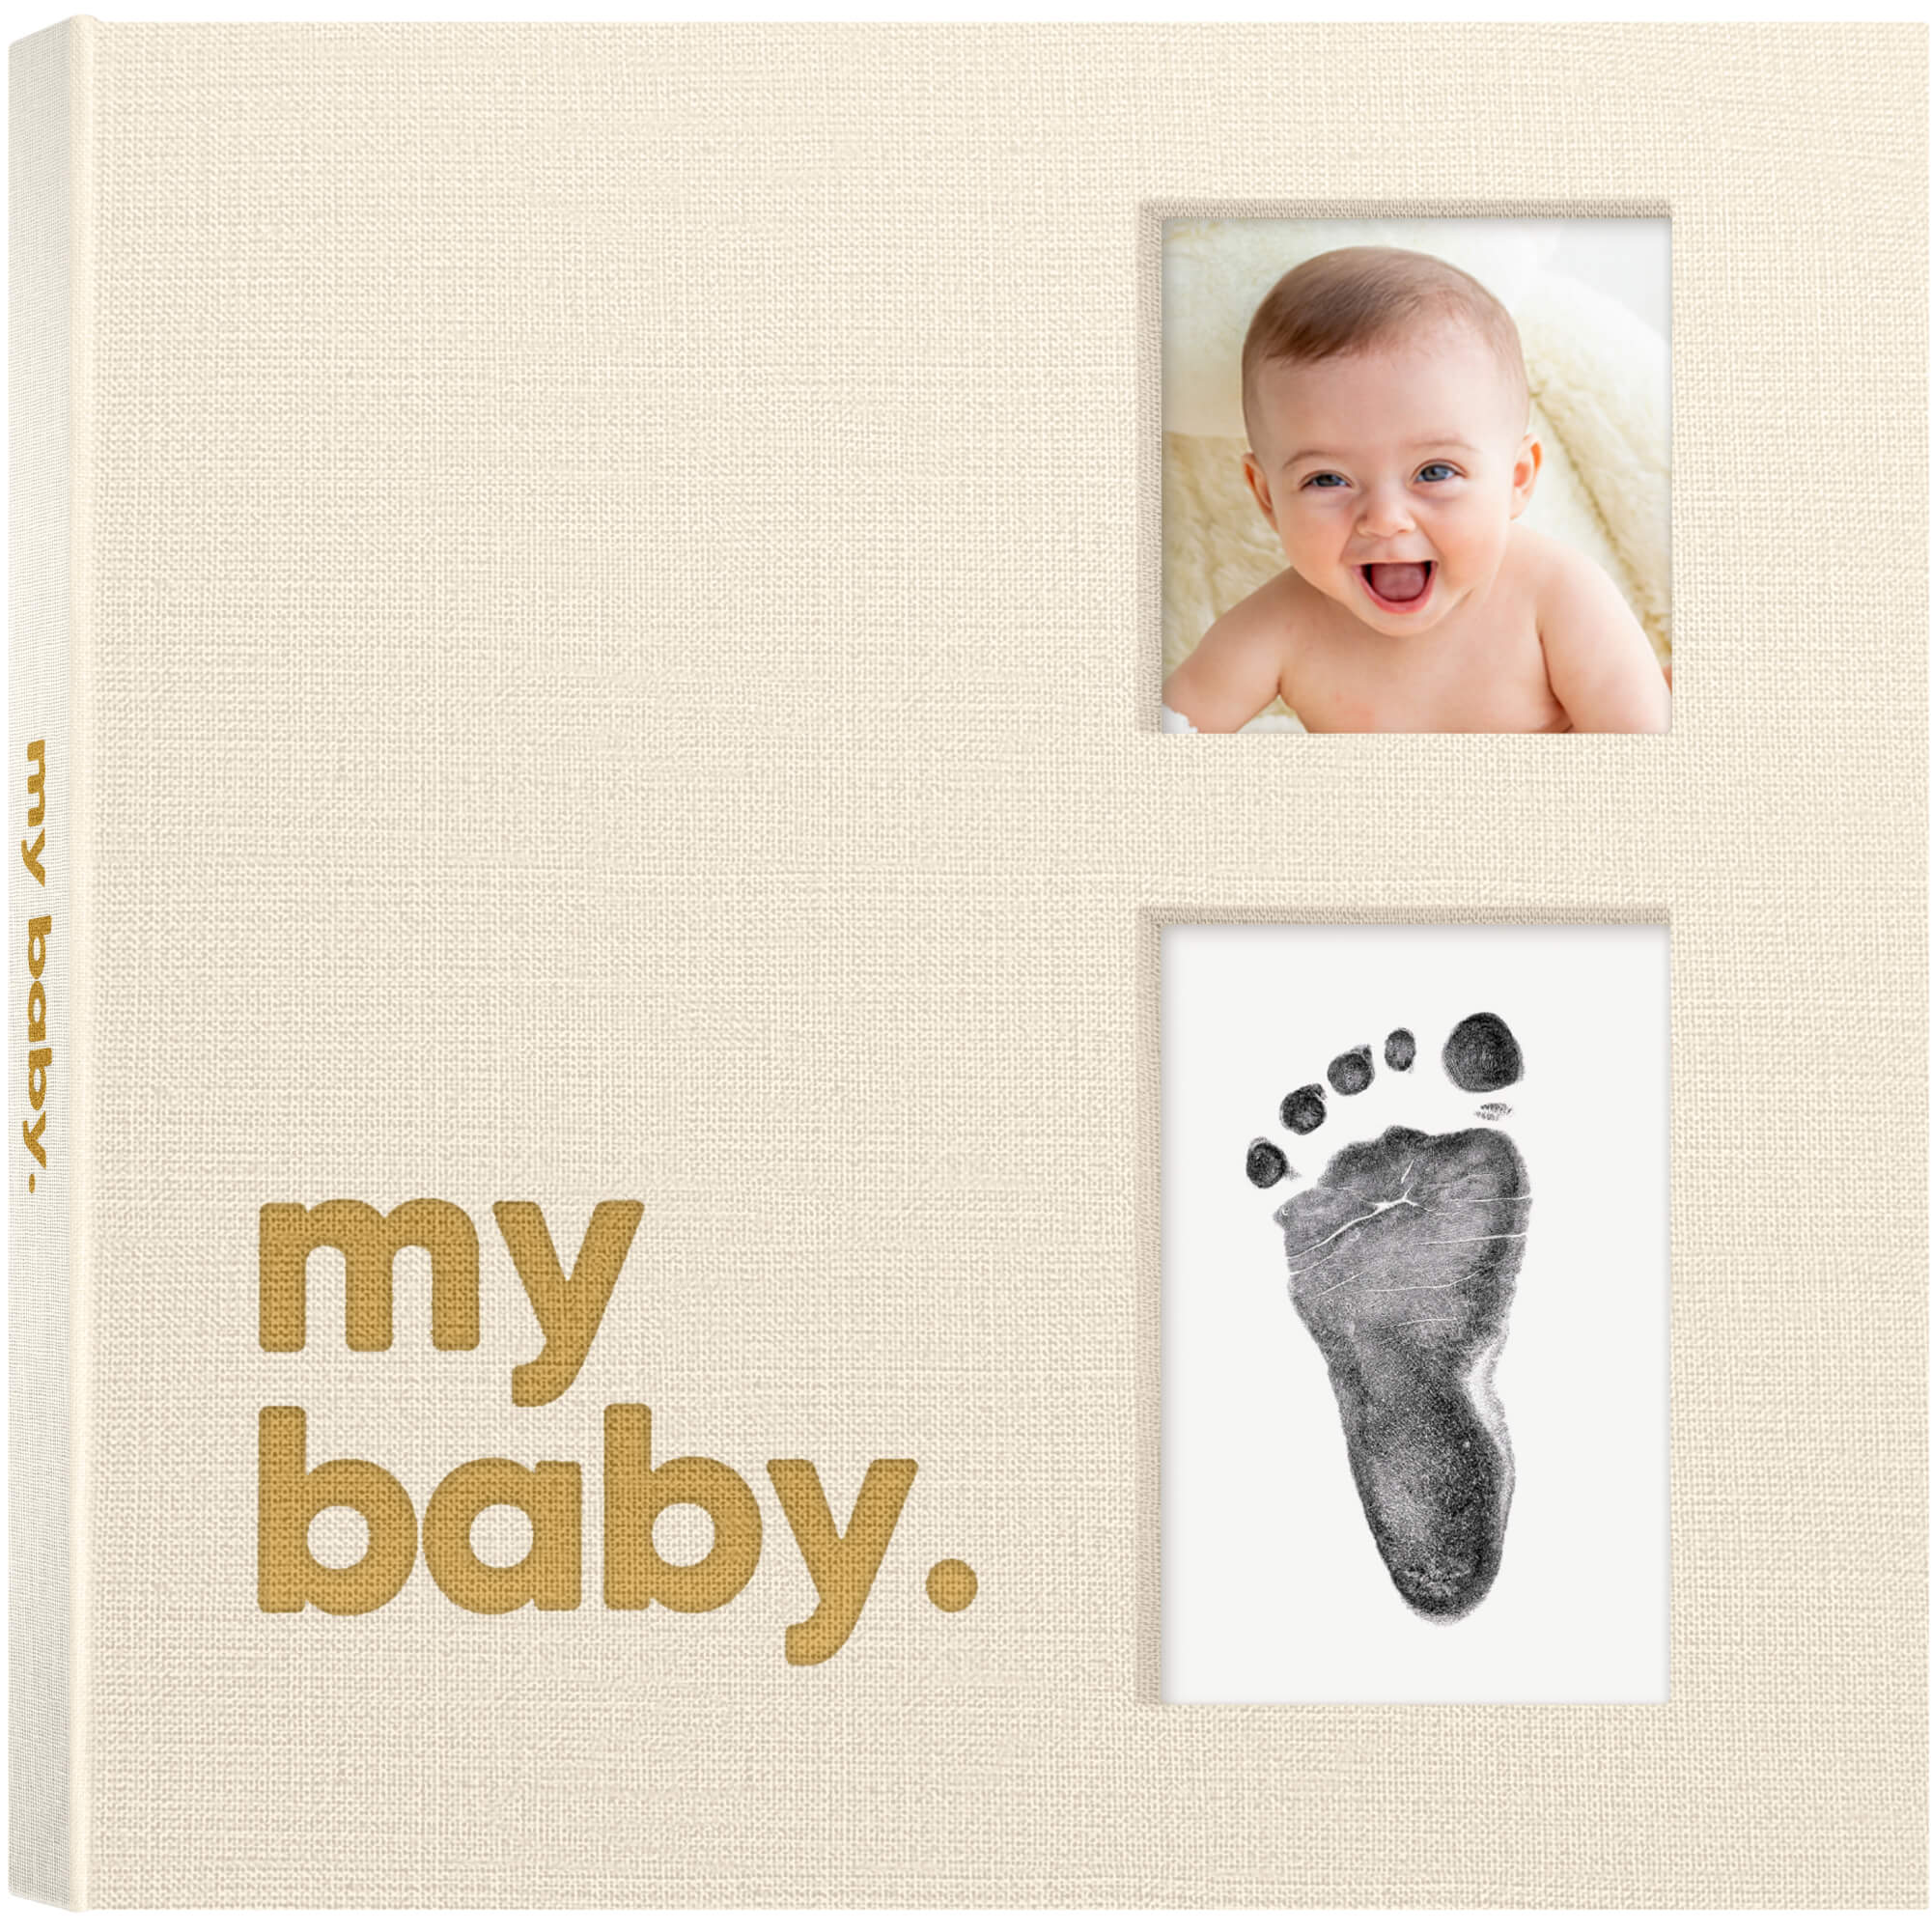 Keababies Sketch Baby Memory Book, Baby Books For New